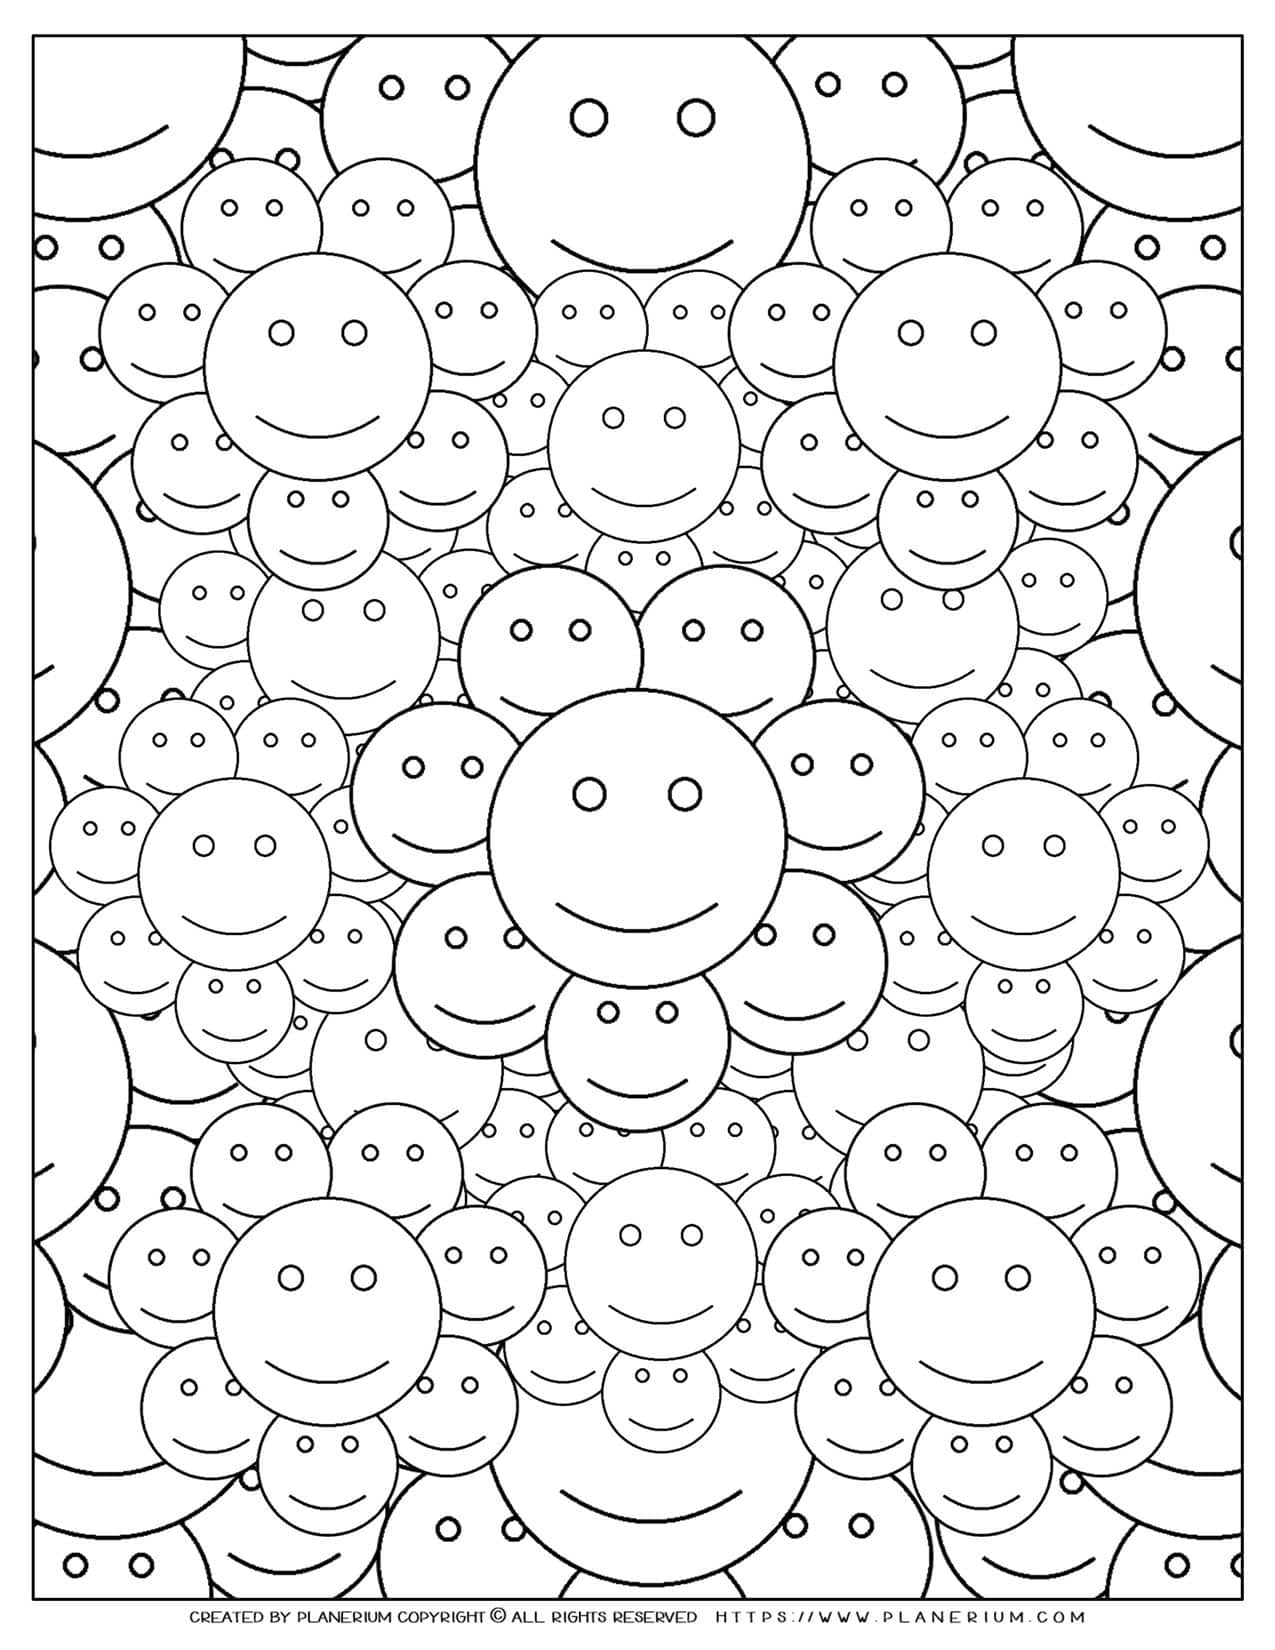 cool smiley face coloring pages